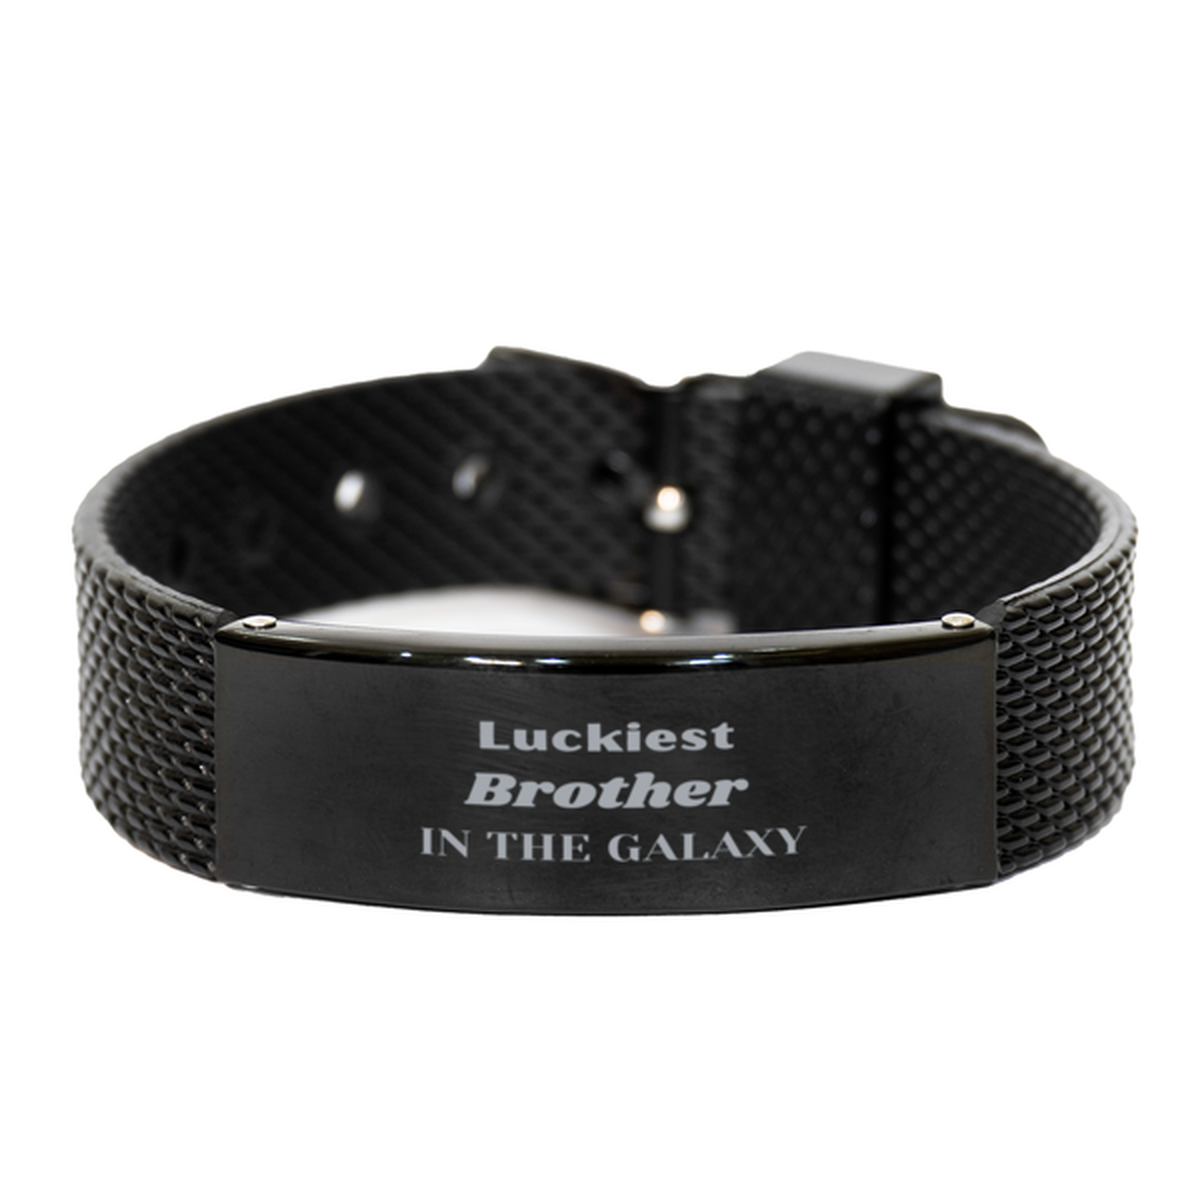 Luckiest Brother in the Galaxy, To My Brother Engraved Gifts, Christmas Brother Black Shark Mesh Bracelet Gifts, X-mas Birthday Unique Gifts For Brother Men Women